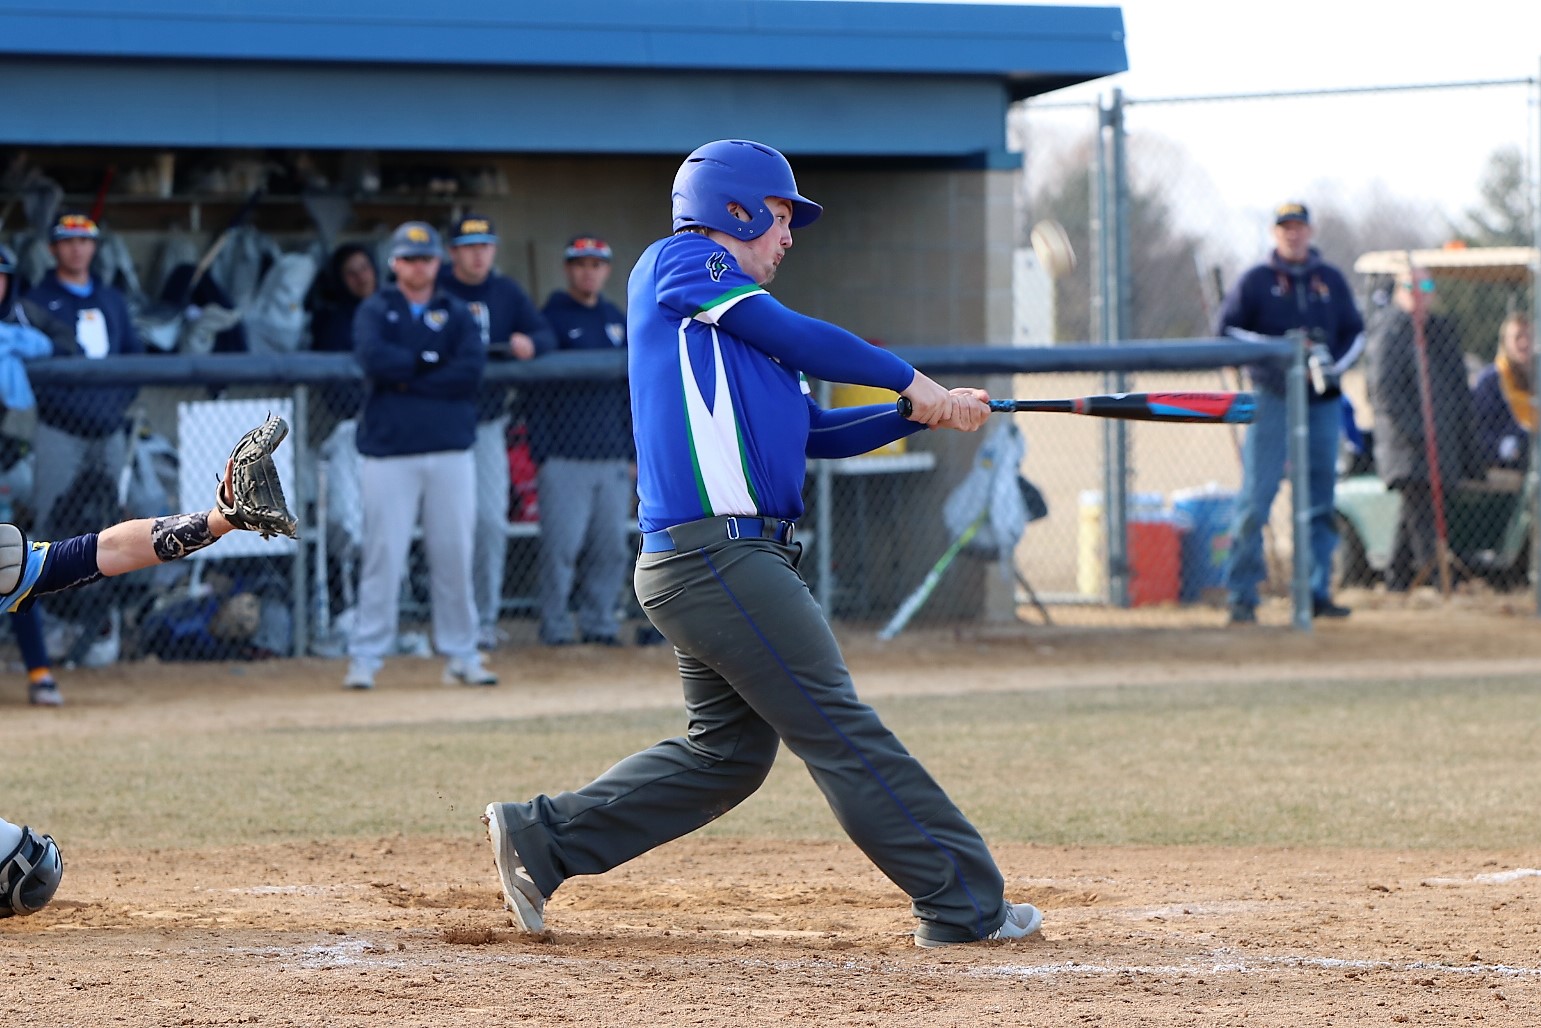 Kyler Moir completing his swing after a hit